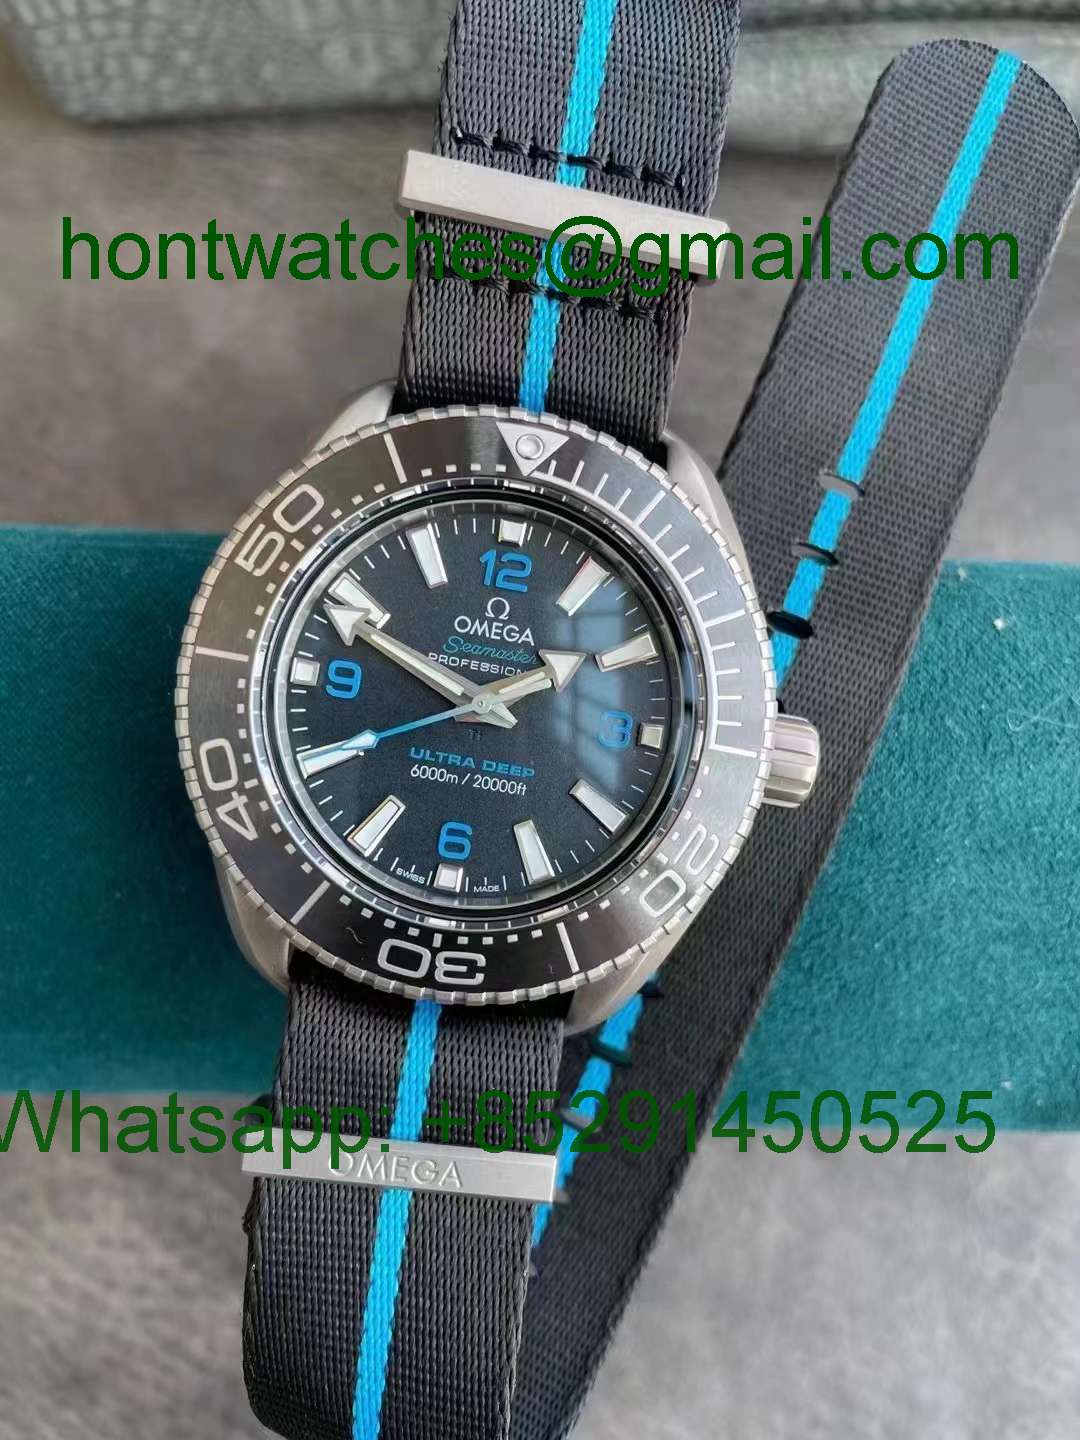 OMEGA Ultra Deep Titanium SBF VSF 1:1 Best NATO Strap Hontwatch Replica Watches Wholesale